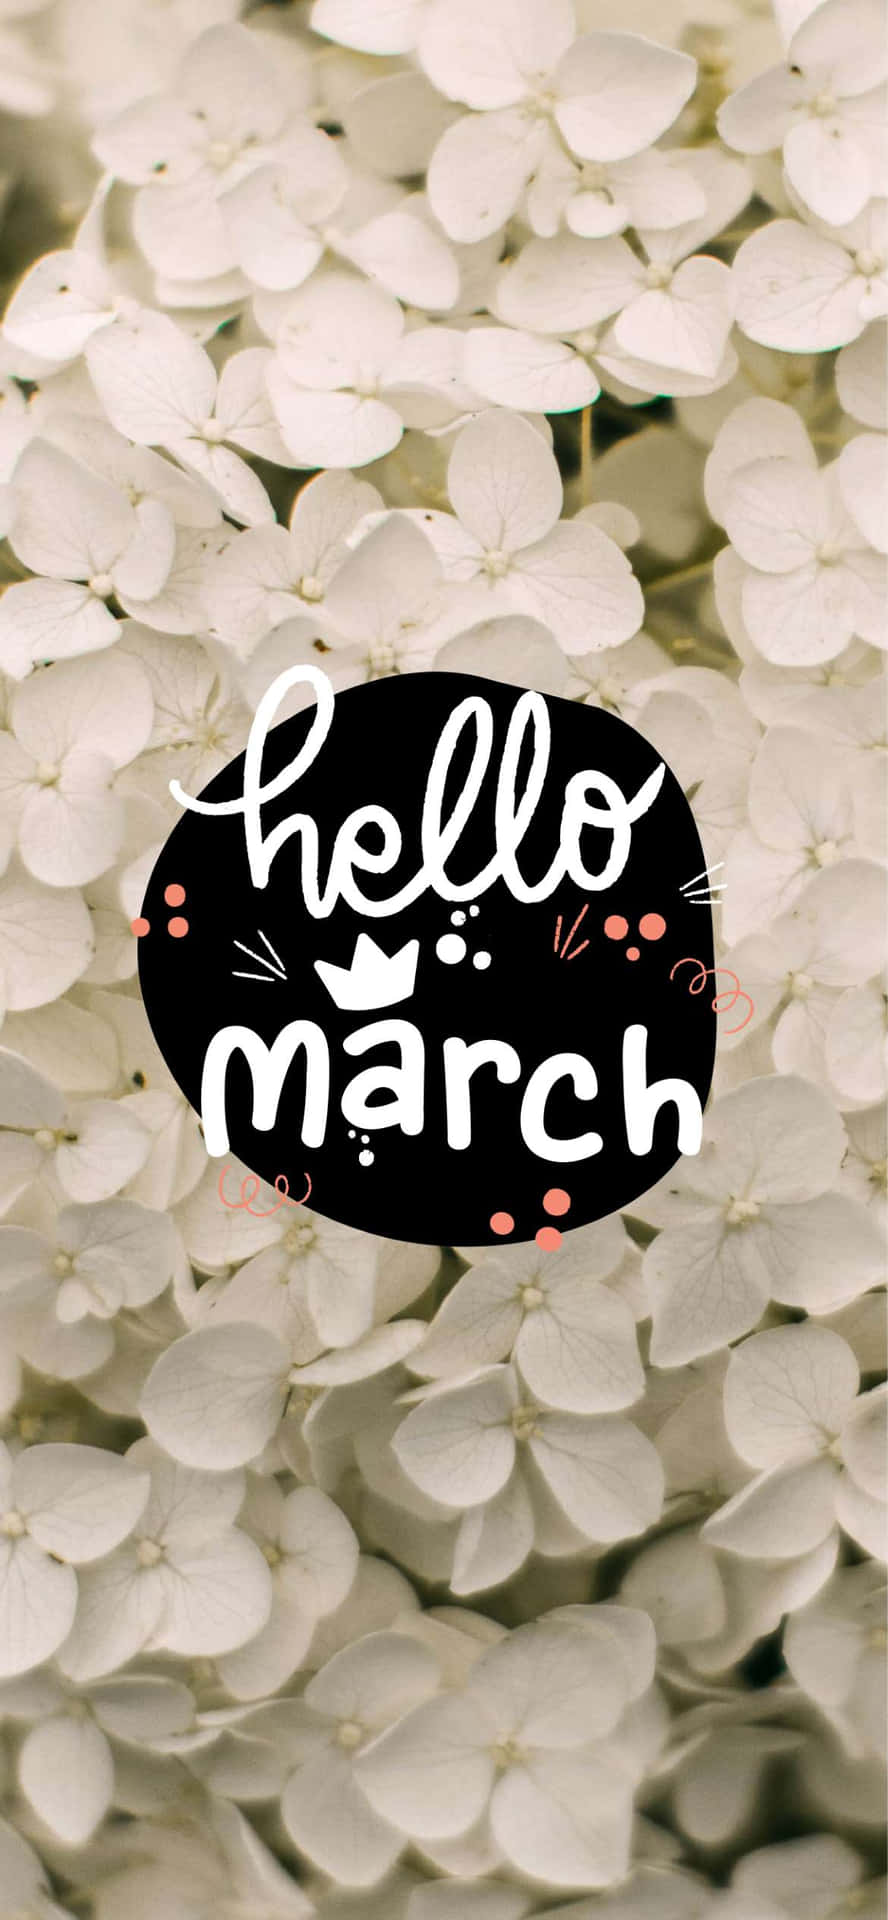 Hello March Floral Greeting Wallpaper